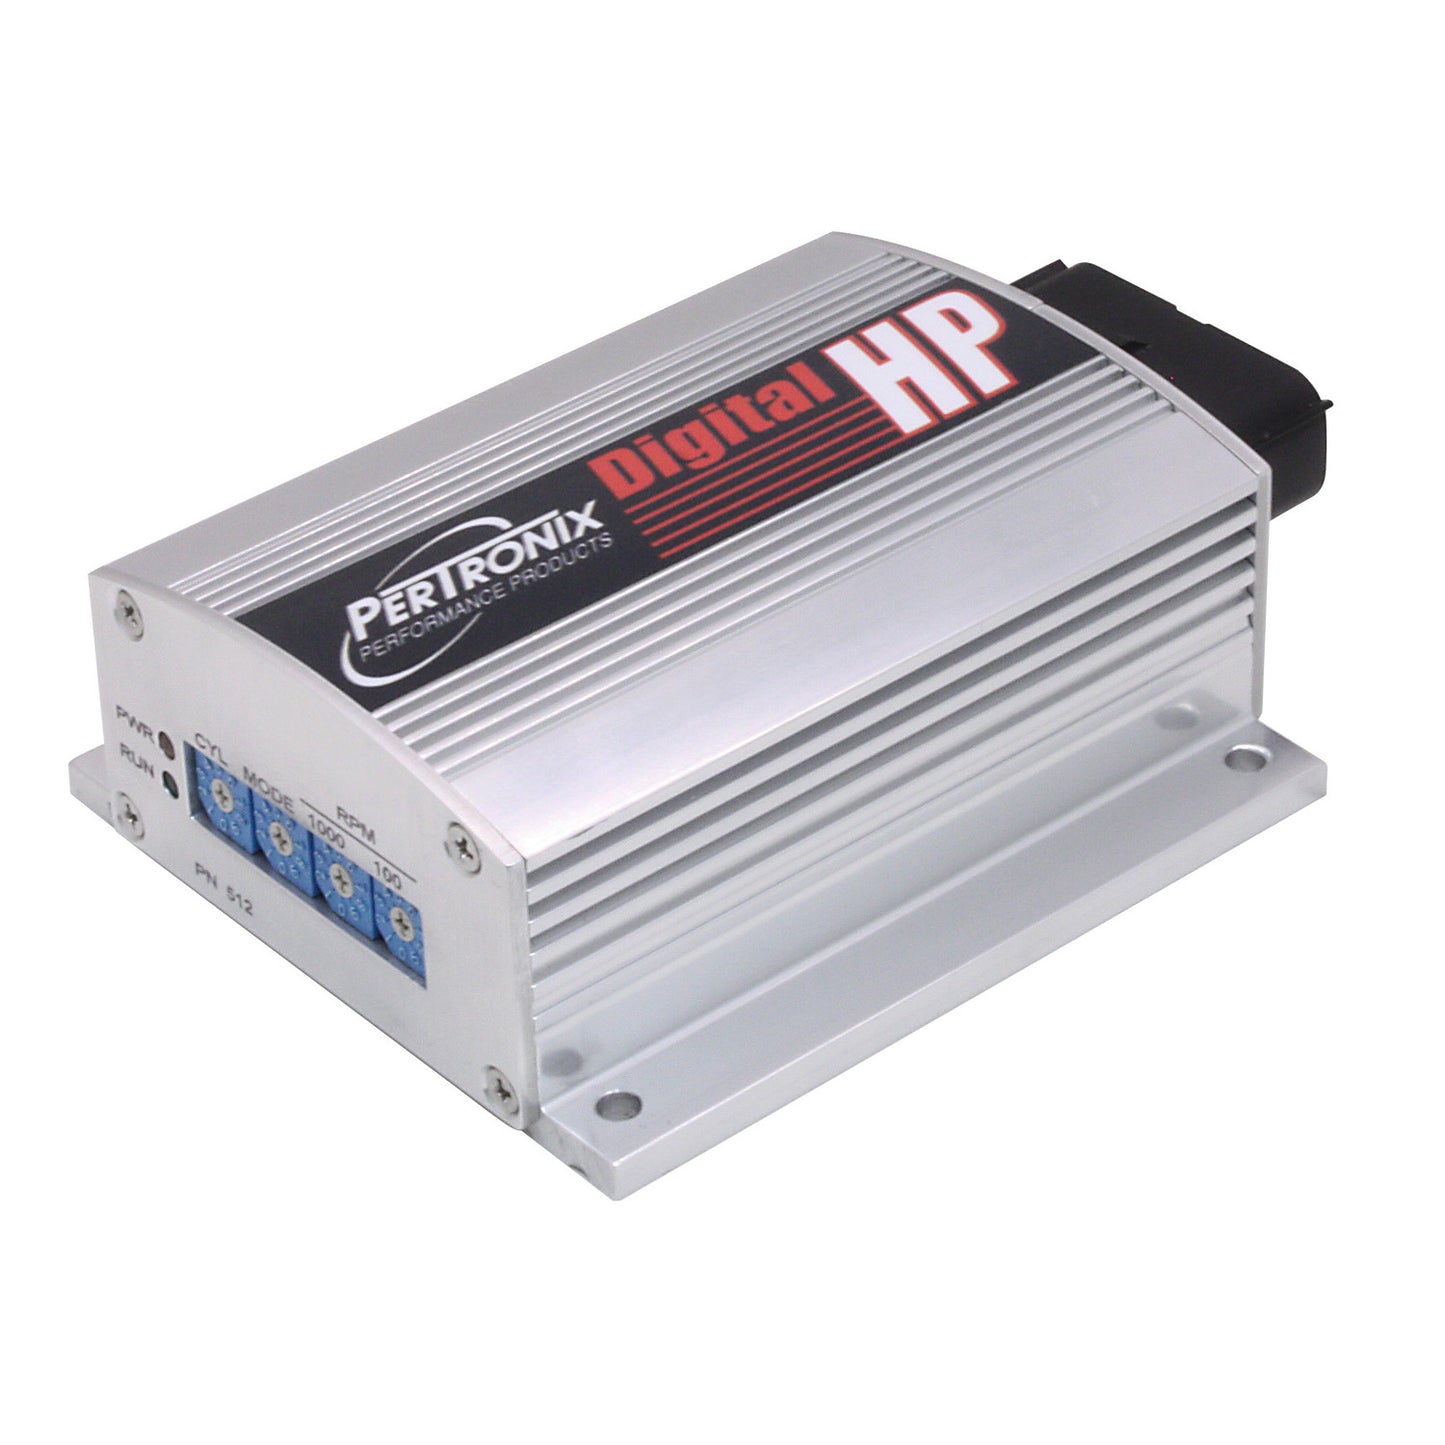 Digital HP Ignition Box Silver Anodized Finish